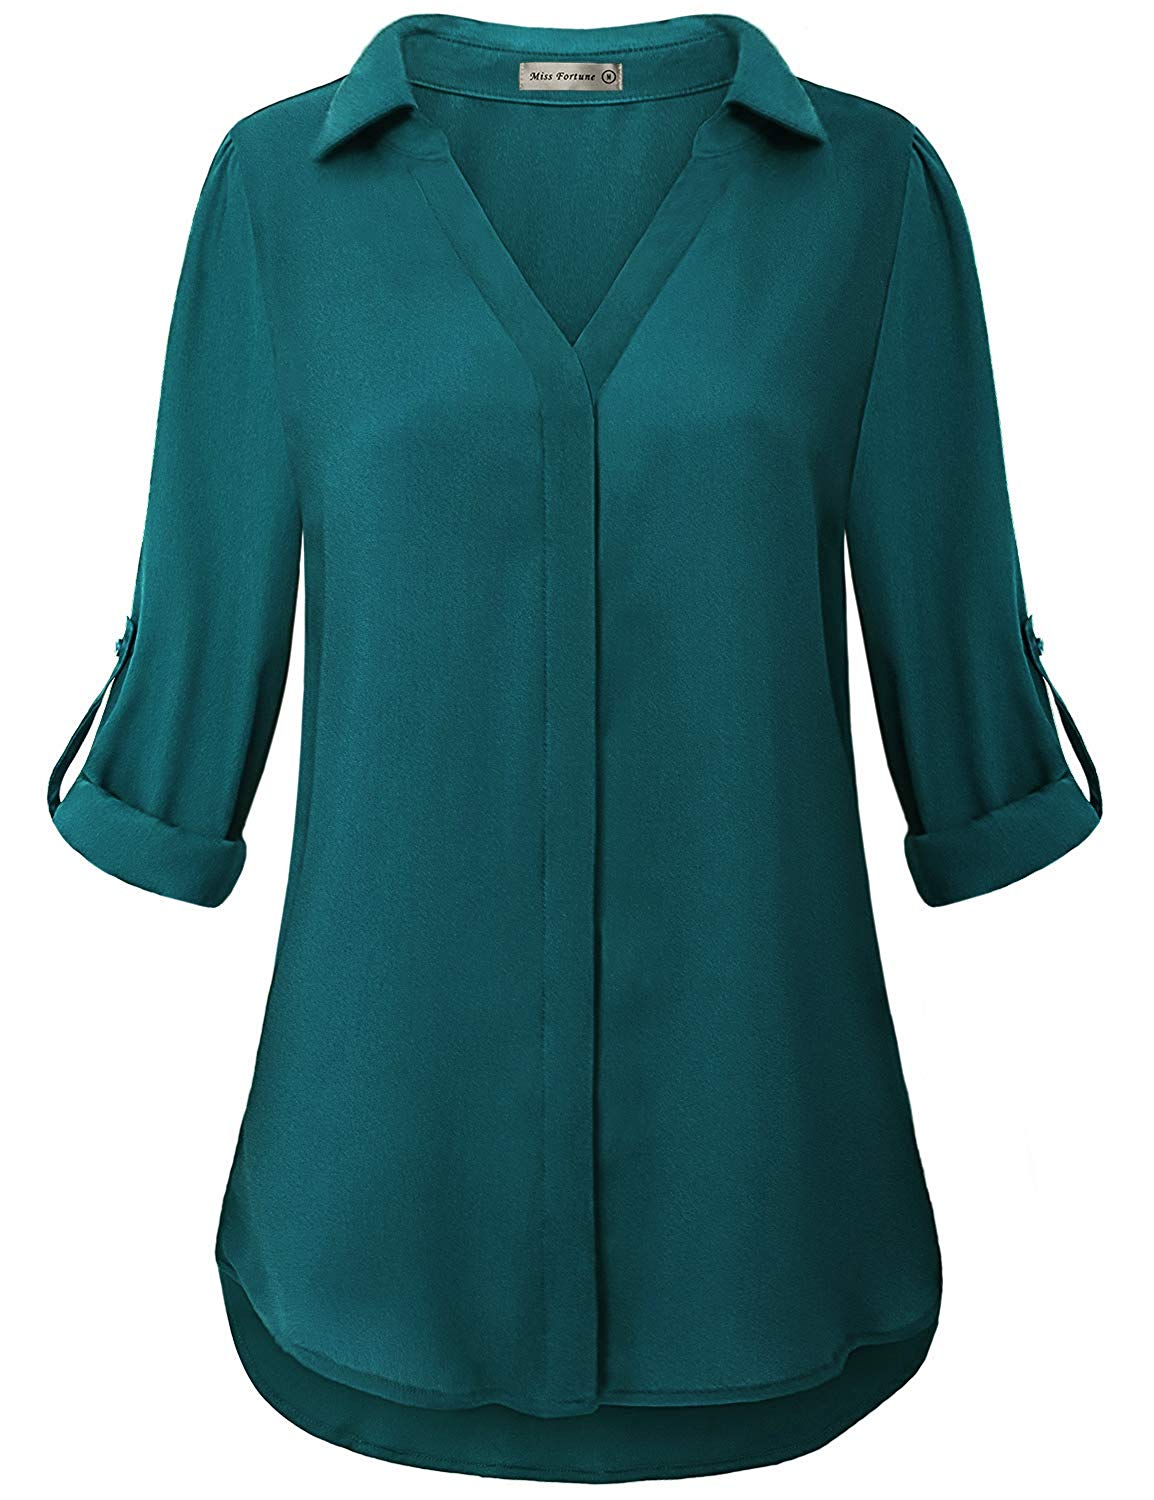 Miss Fortune Business Casual Blouses for Women, Ladys Work Tunic Laple Collar...